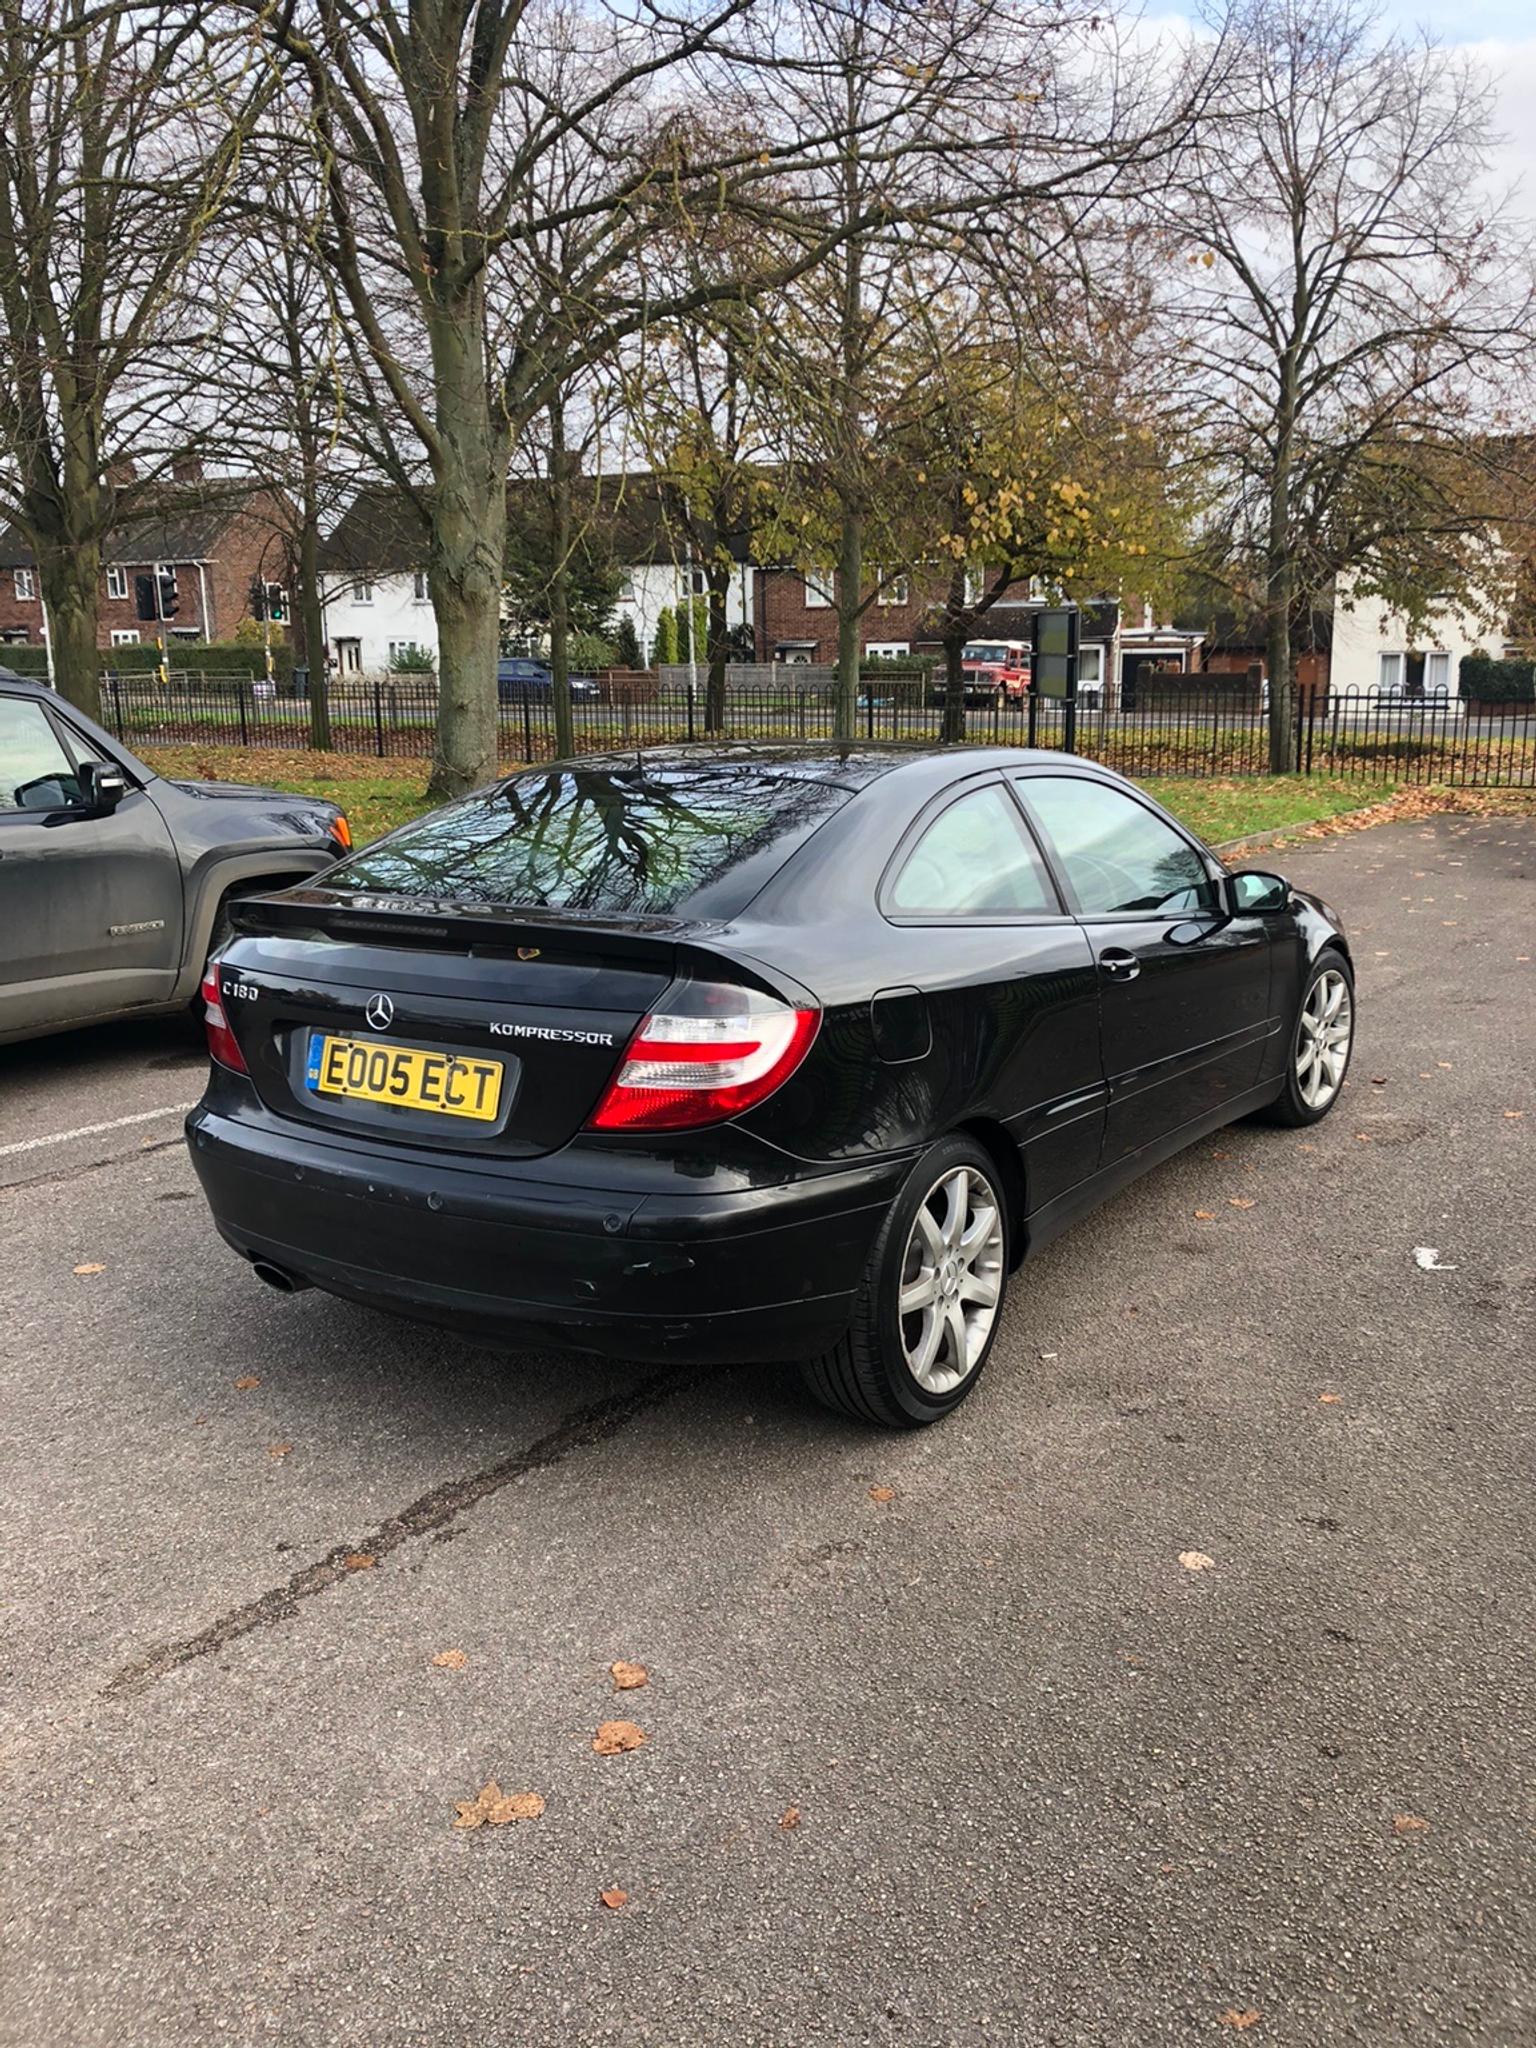 Mercedes c180 coupe se 2005 in East Hertfordshire for £1,000.00 for ...